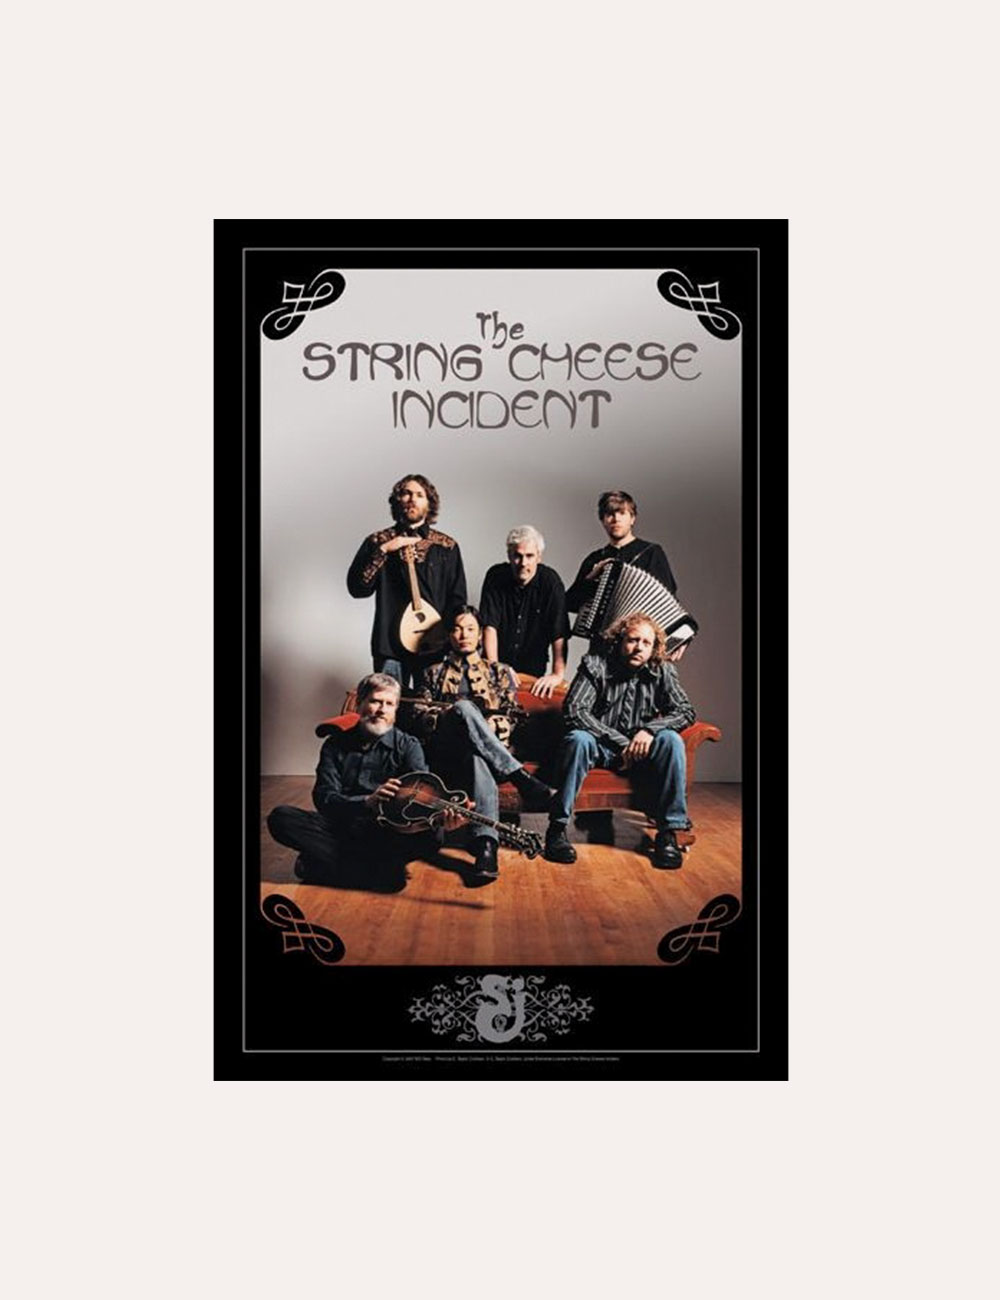 The String Cheese Incident - Merch - Poster - 2007 Band Photo Poster